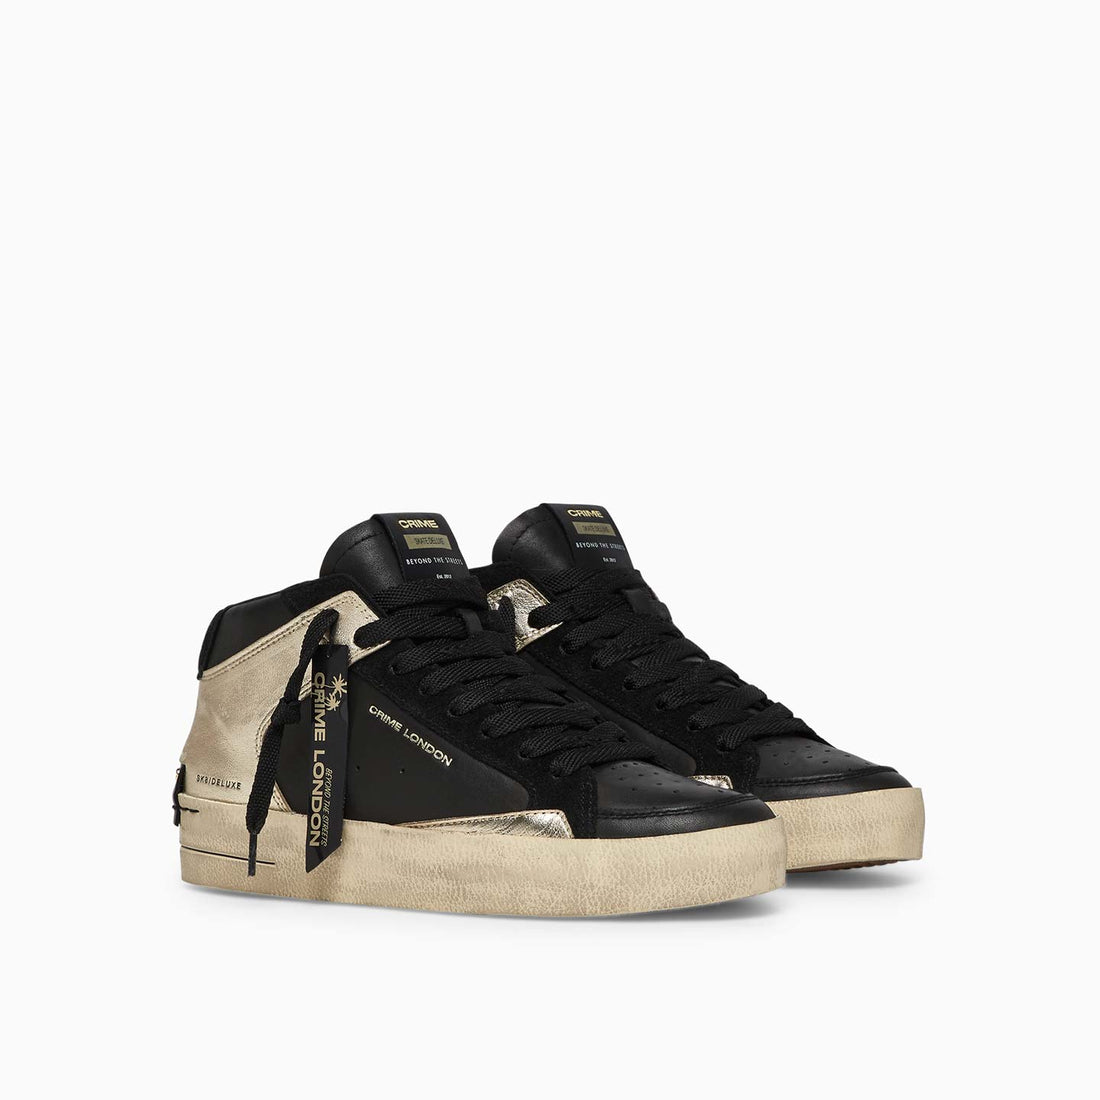 CRIME LONDON SK8 DELUXE MID GOLD FEVER